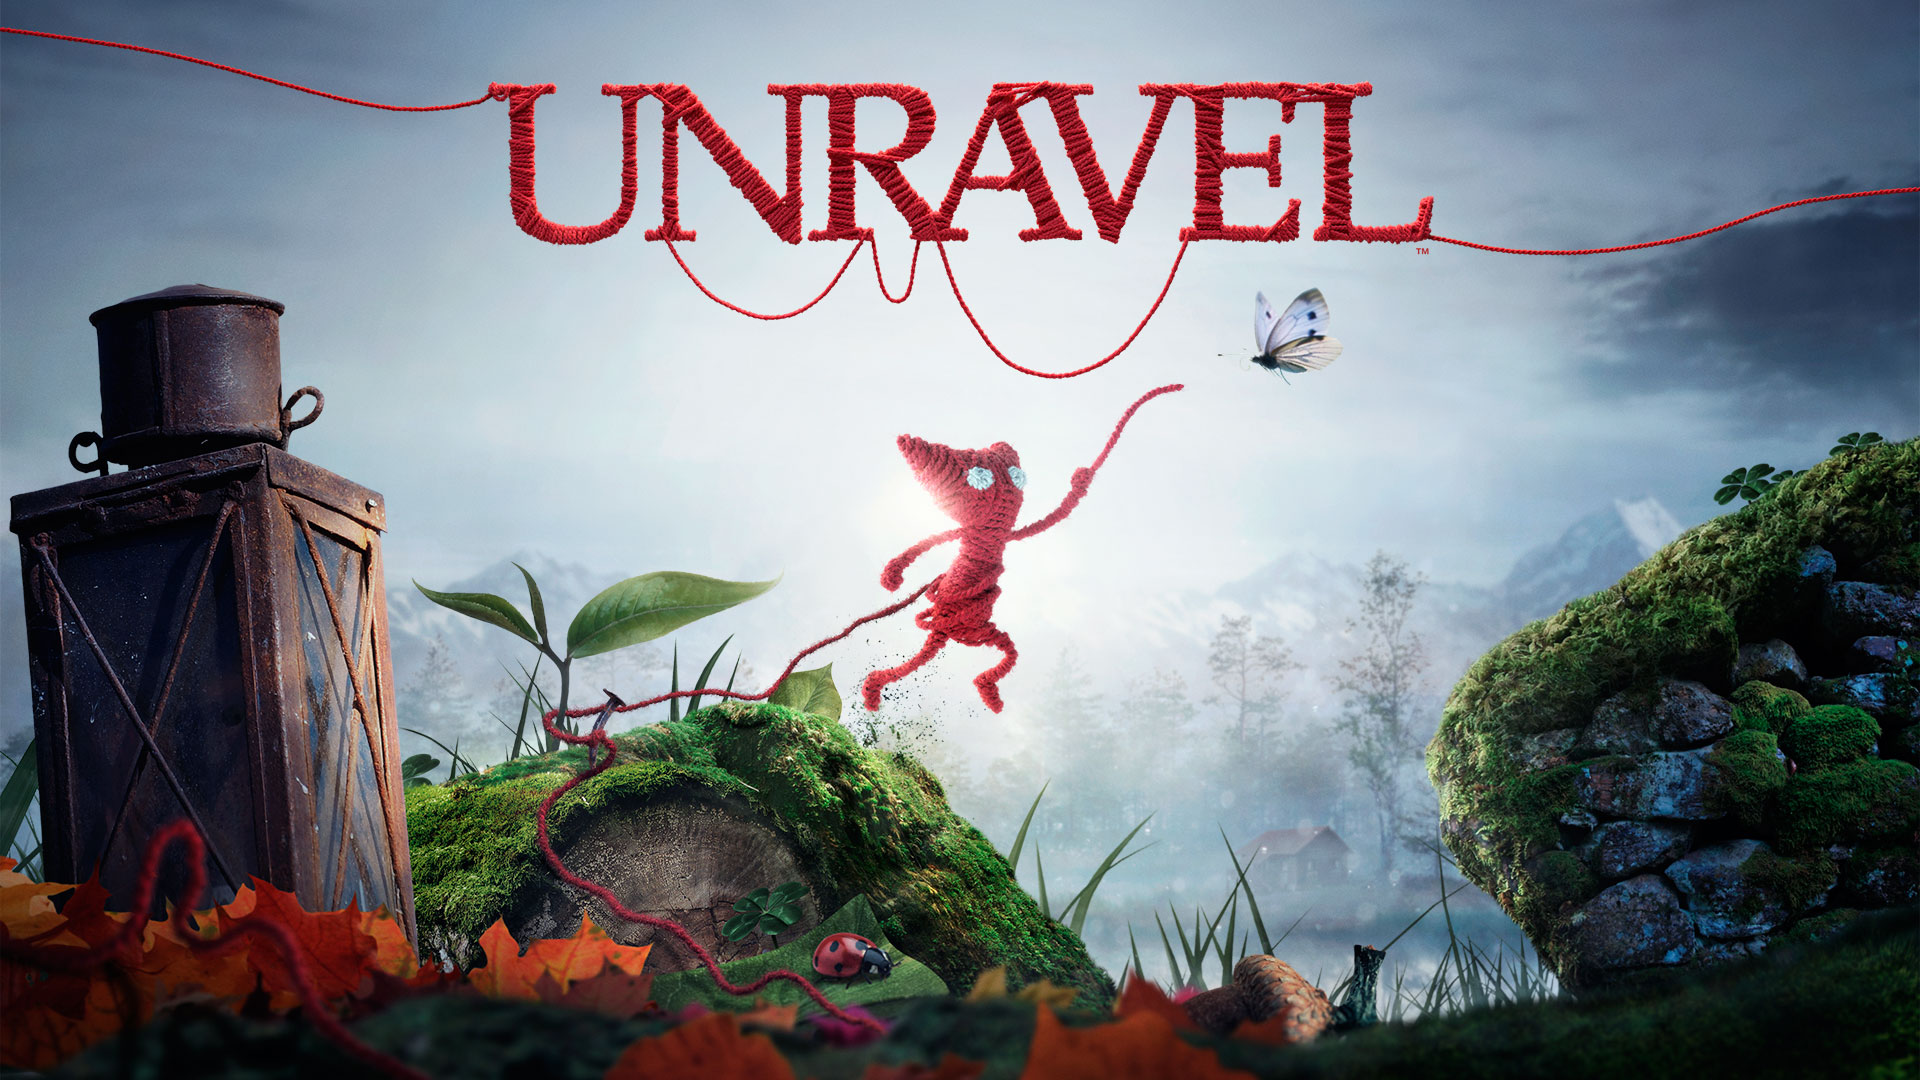 Download Unravel Two wallpapers for mobile phone, free Unravel